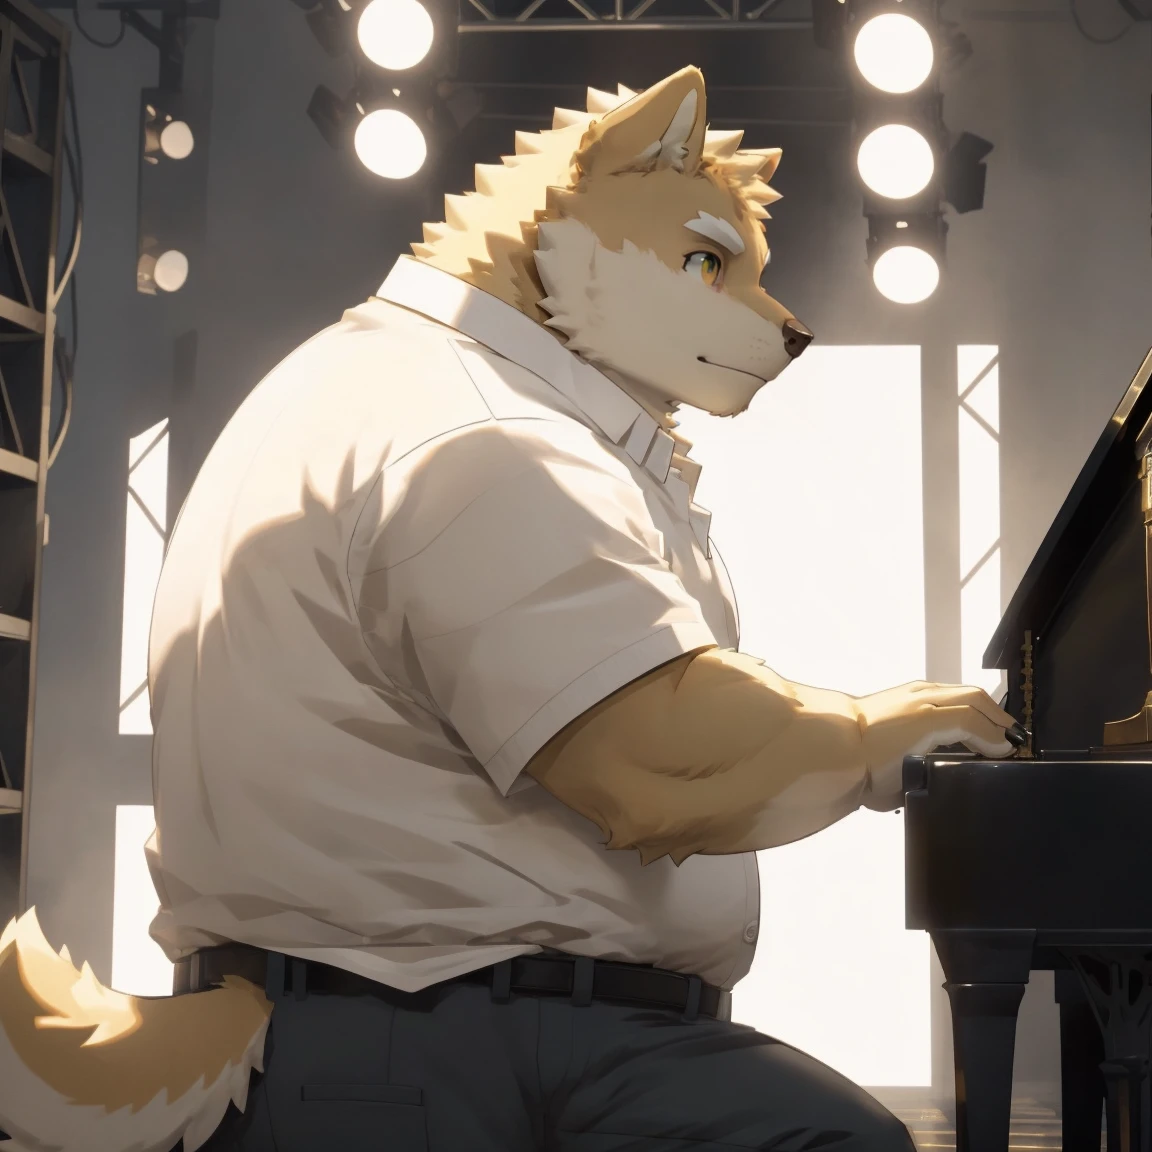 masterpiece, best quality, 8k resolution, Very detailed, hairy，shiba inu，(Black hair)，(((Golden fur)))，(((Golden Eyes)))，Chubby，Chubby face，(((White shirt)))，(((Loose shirt)))，((Black pants))，Highest quality scene，(((Solitary)))，(((solitary)))，((Playing the piano))，((light))，(((piano)))，(((earnest)))，(((Round face)))，(((whole body)))，(((Medium shot)))，(((stage)))，(((on the side of)))，((Sitting on the piano stool))